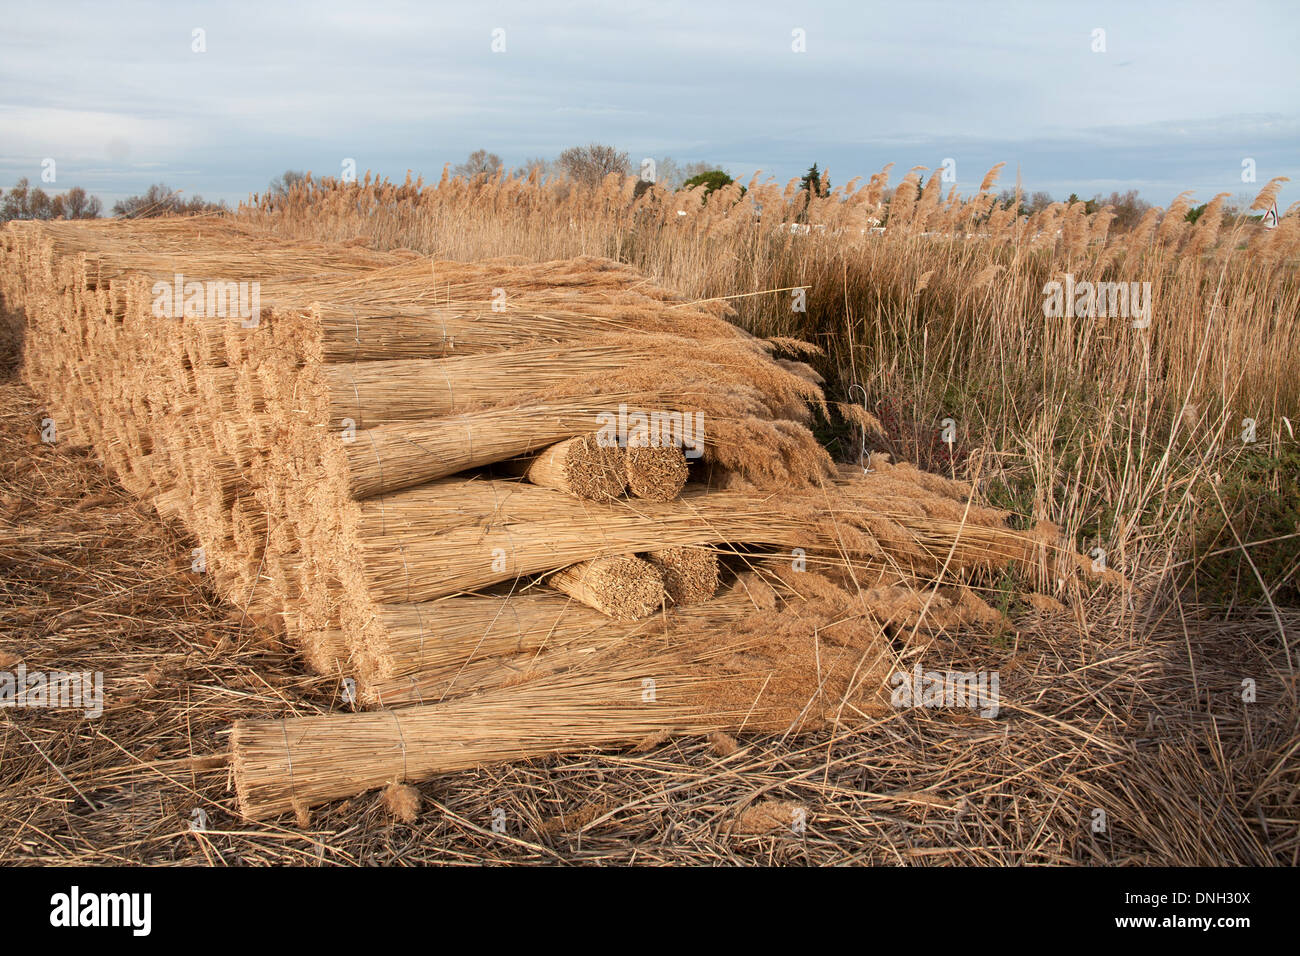 STALKS OF REEDS, REEDS HAVE BEEN GATHERED IN WINTER SINCE THE MIDDLE AGES AND SERVE AS FILLER AND ROOF COVERING FOR HOUSES, SAINTES-MARIES-DE-LA-MER, BOUCHES-DU-RHONE (13), FRANCE Stock Photo